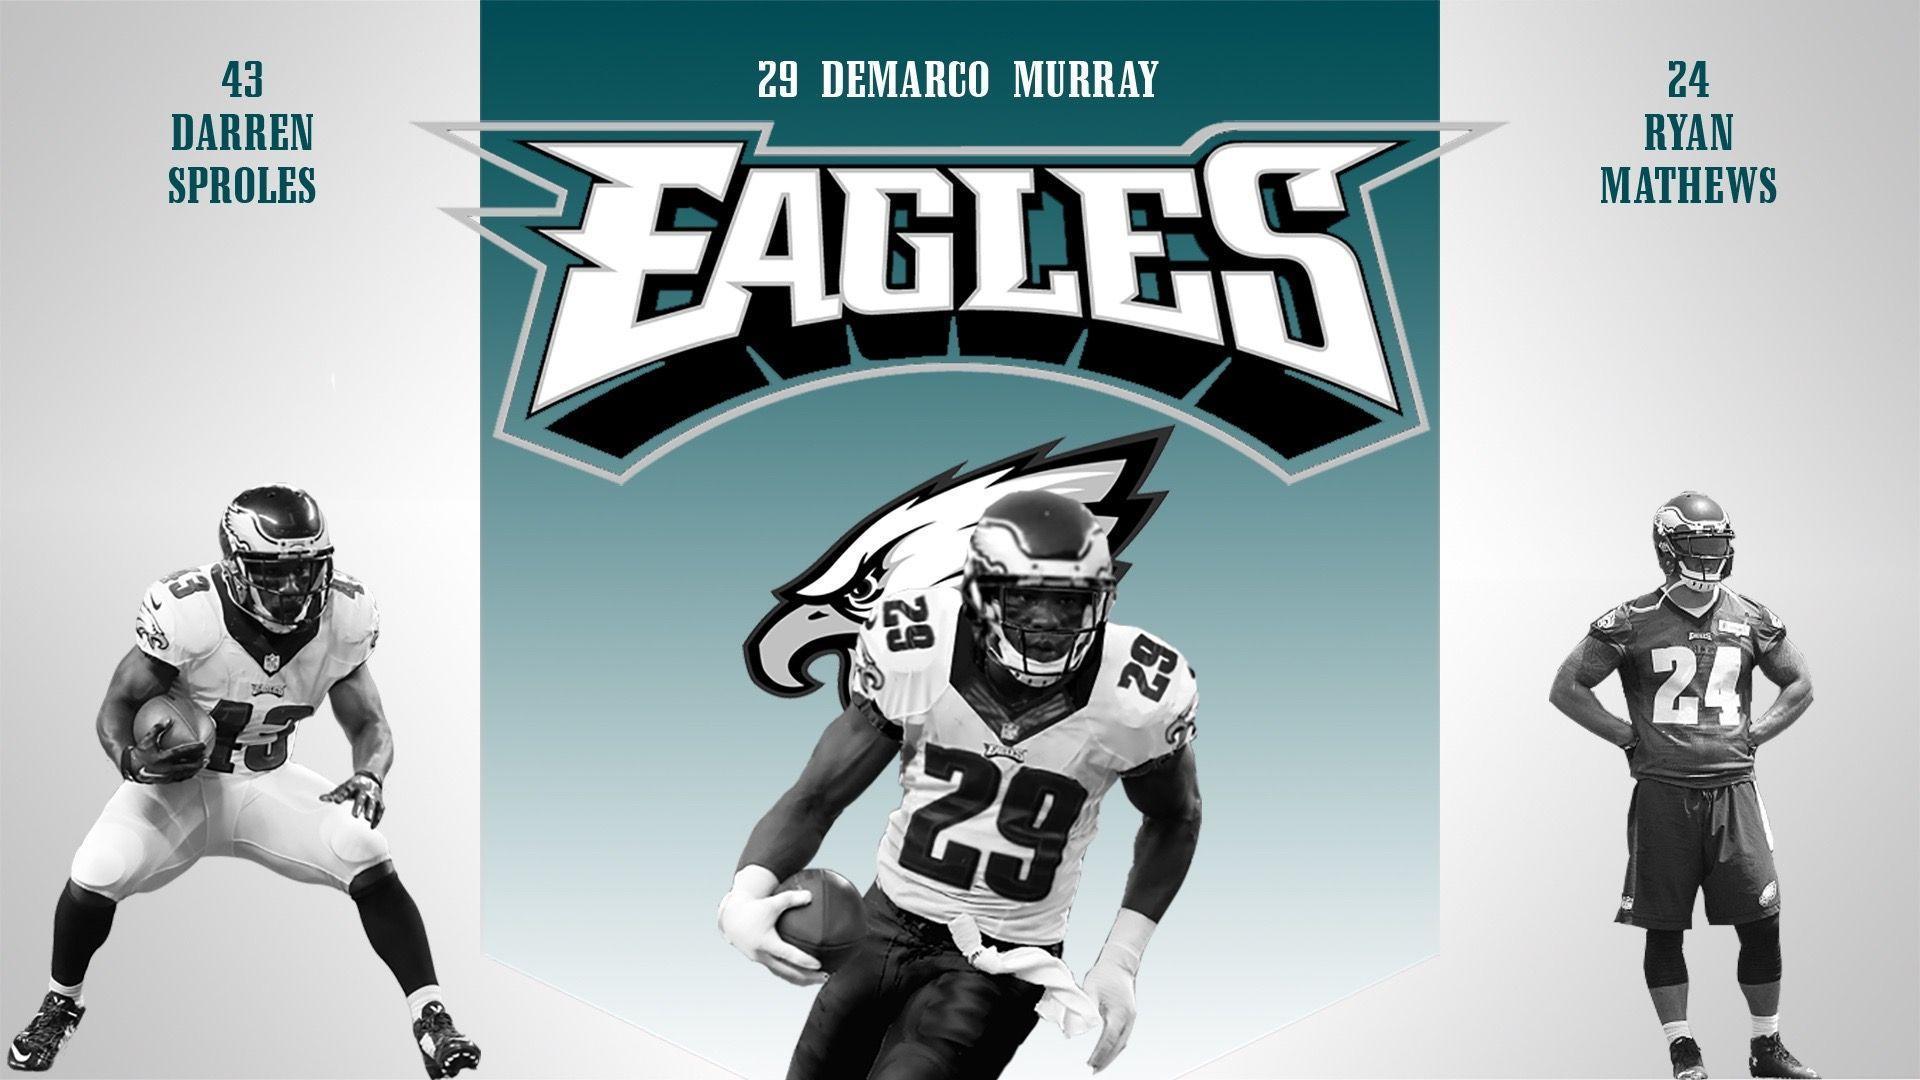 Hey Eagles fans, I made some wallpaper for every NFL team. Here